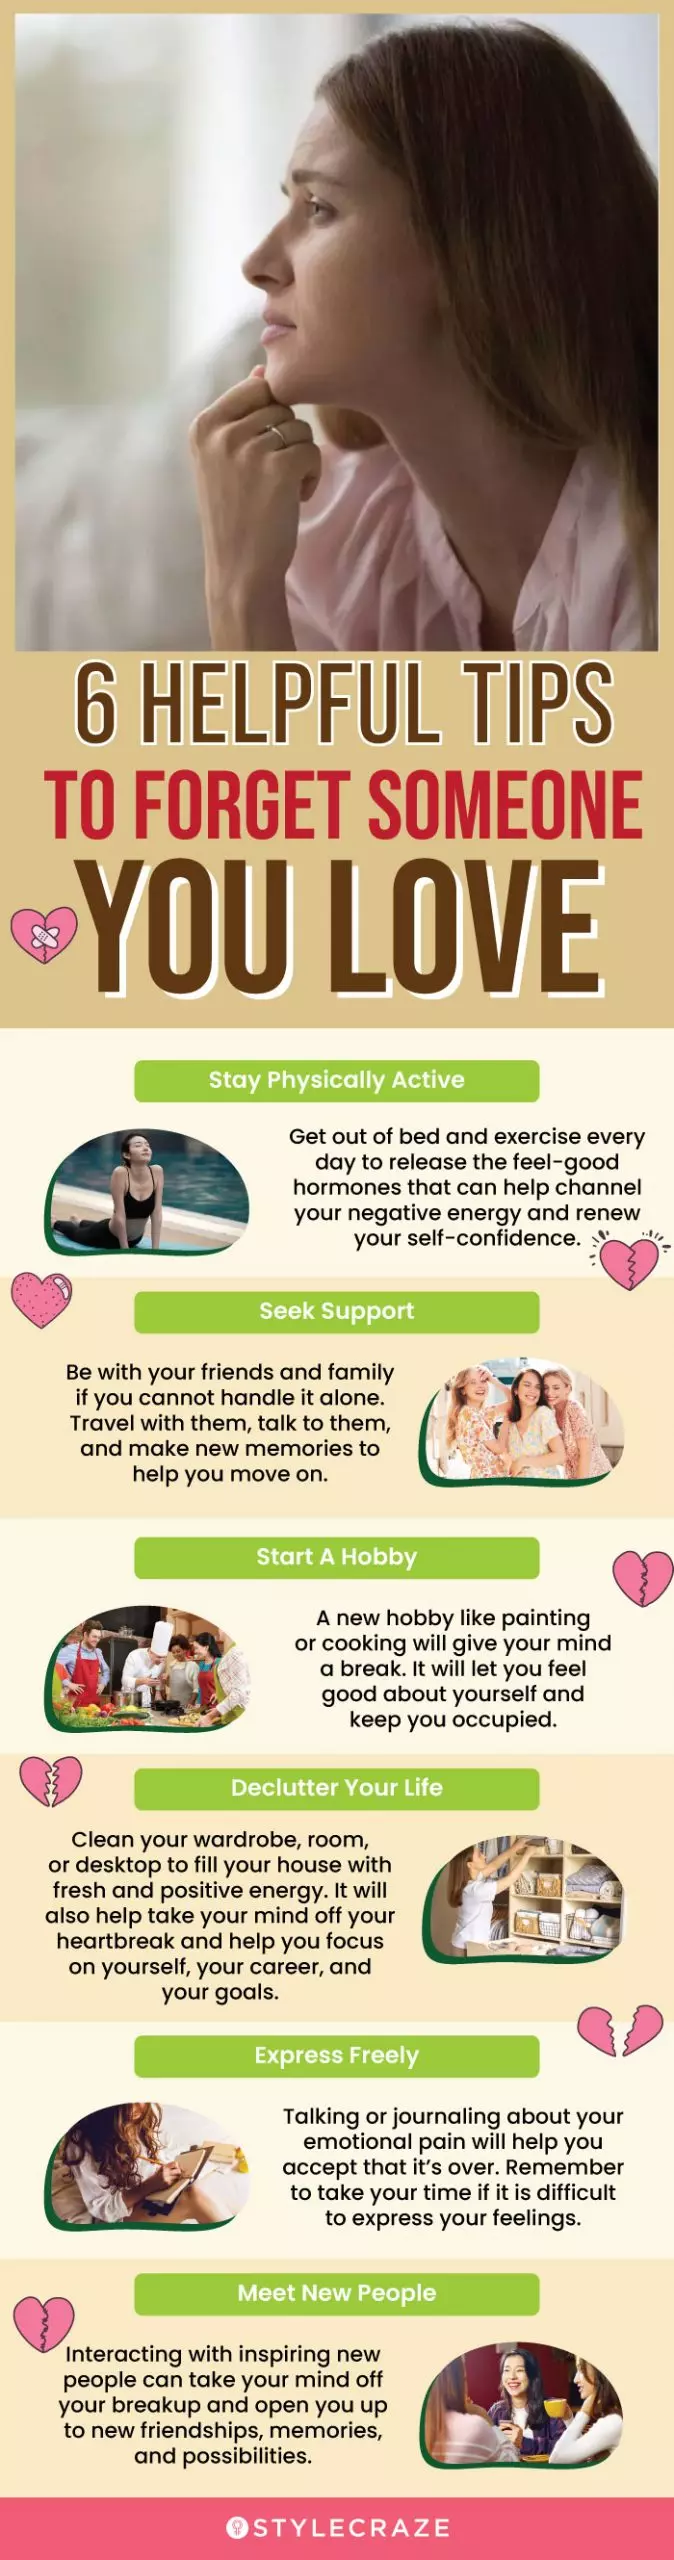 6 helpful tips to forget someone you love (infographic)